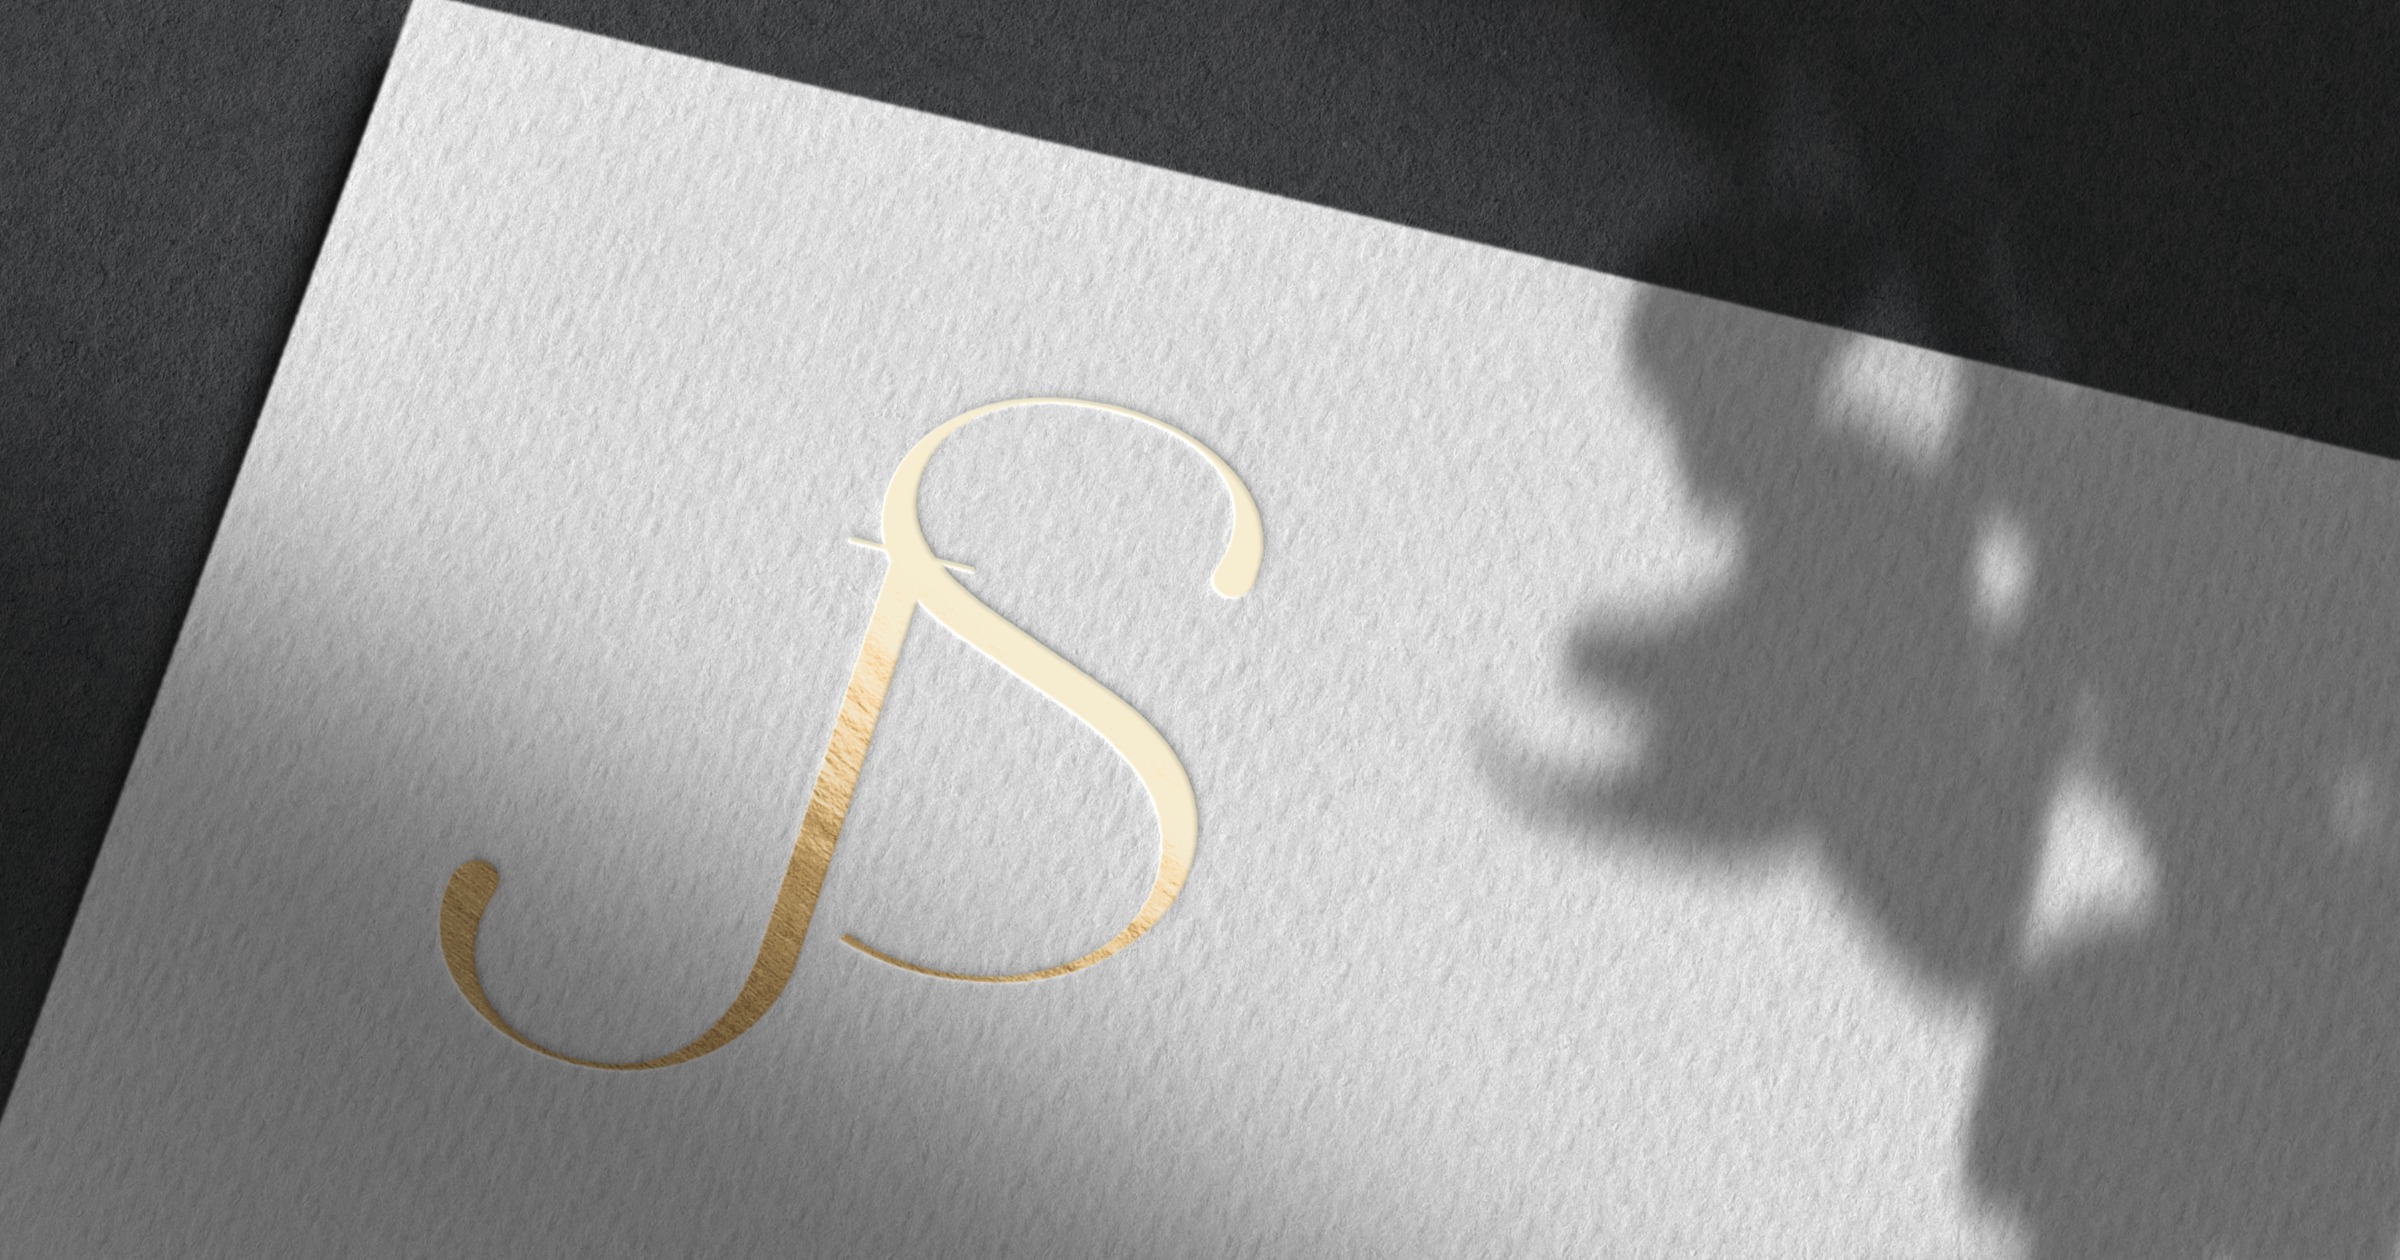 Everyone Needs A Wedding Monogram And DesigningLove Is Here To Help